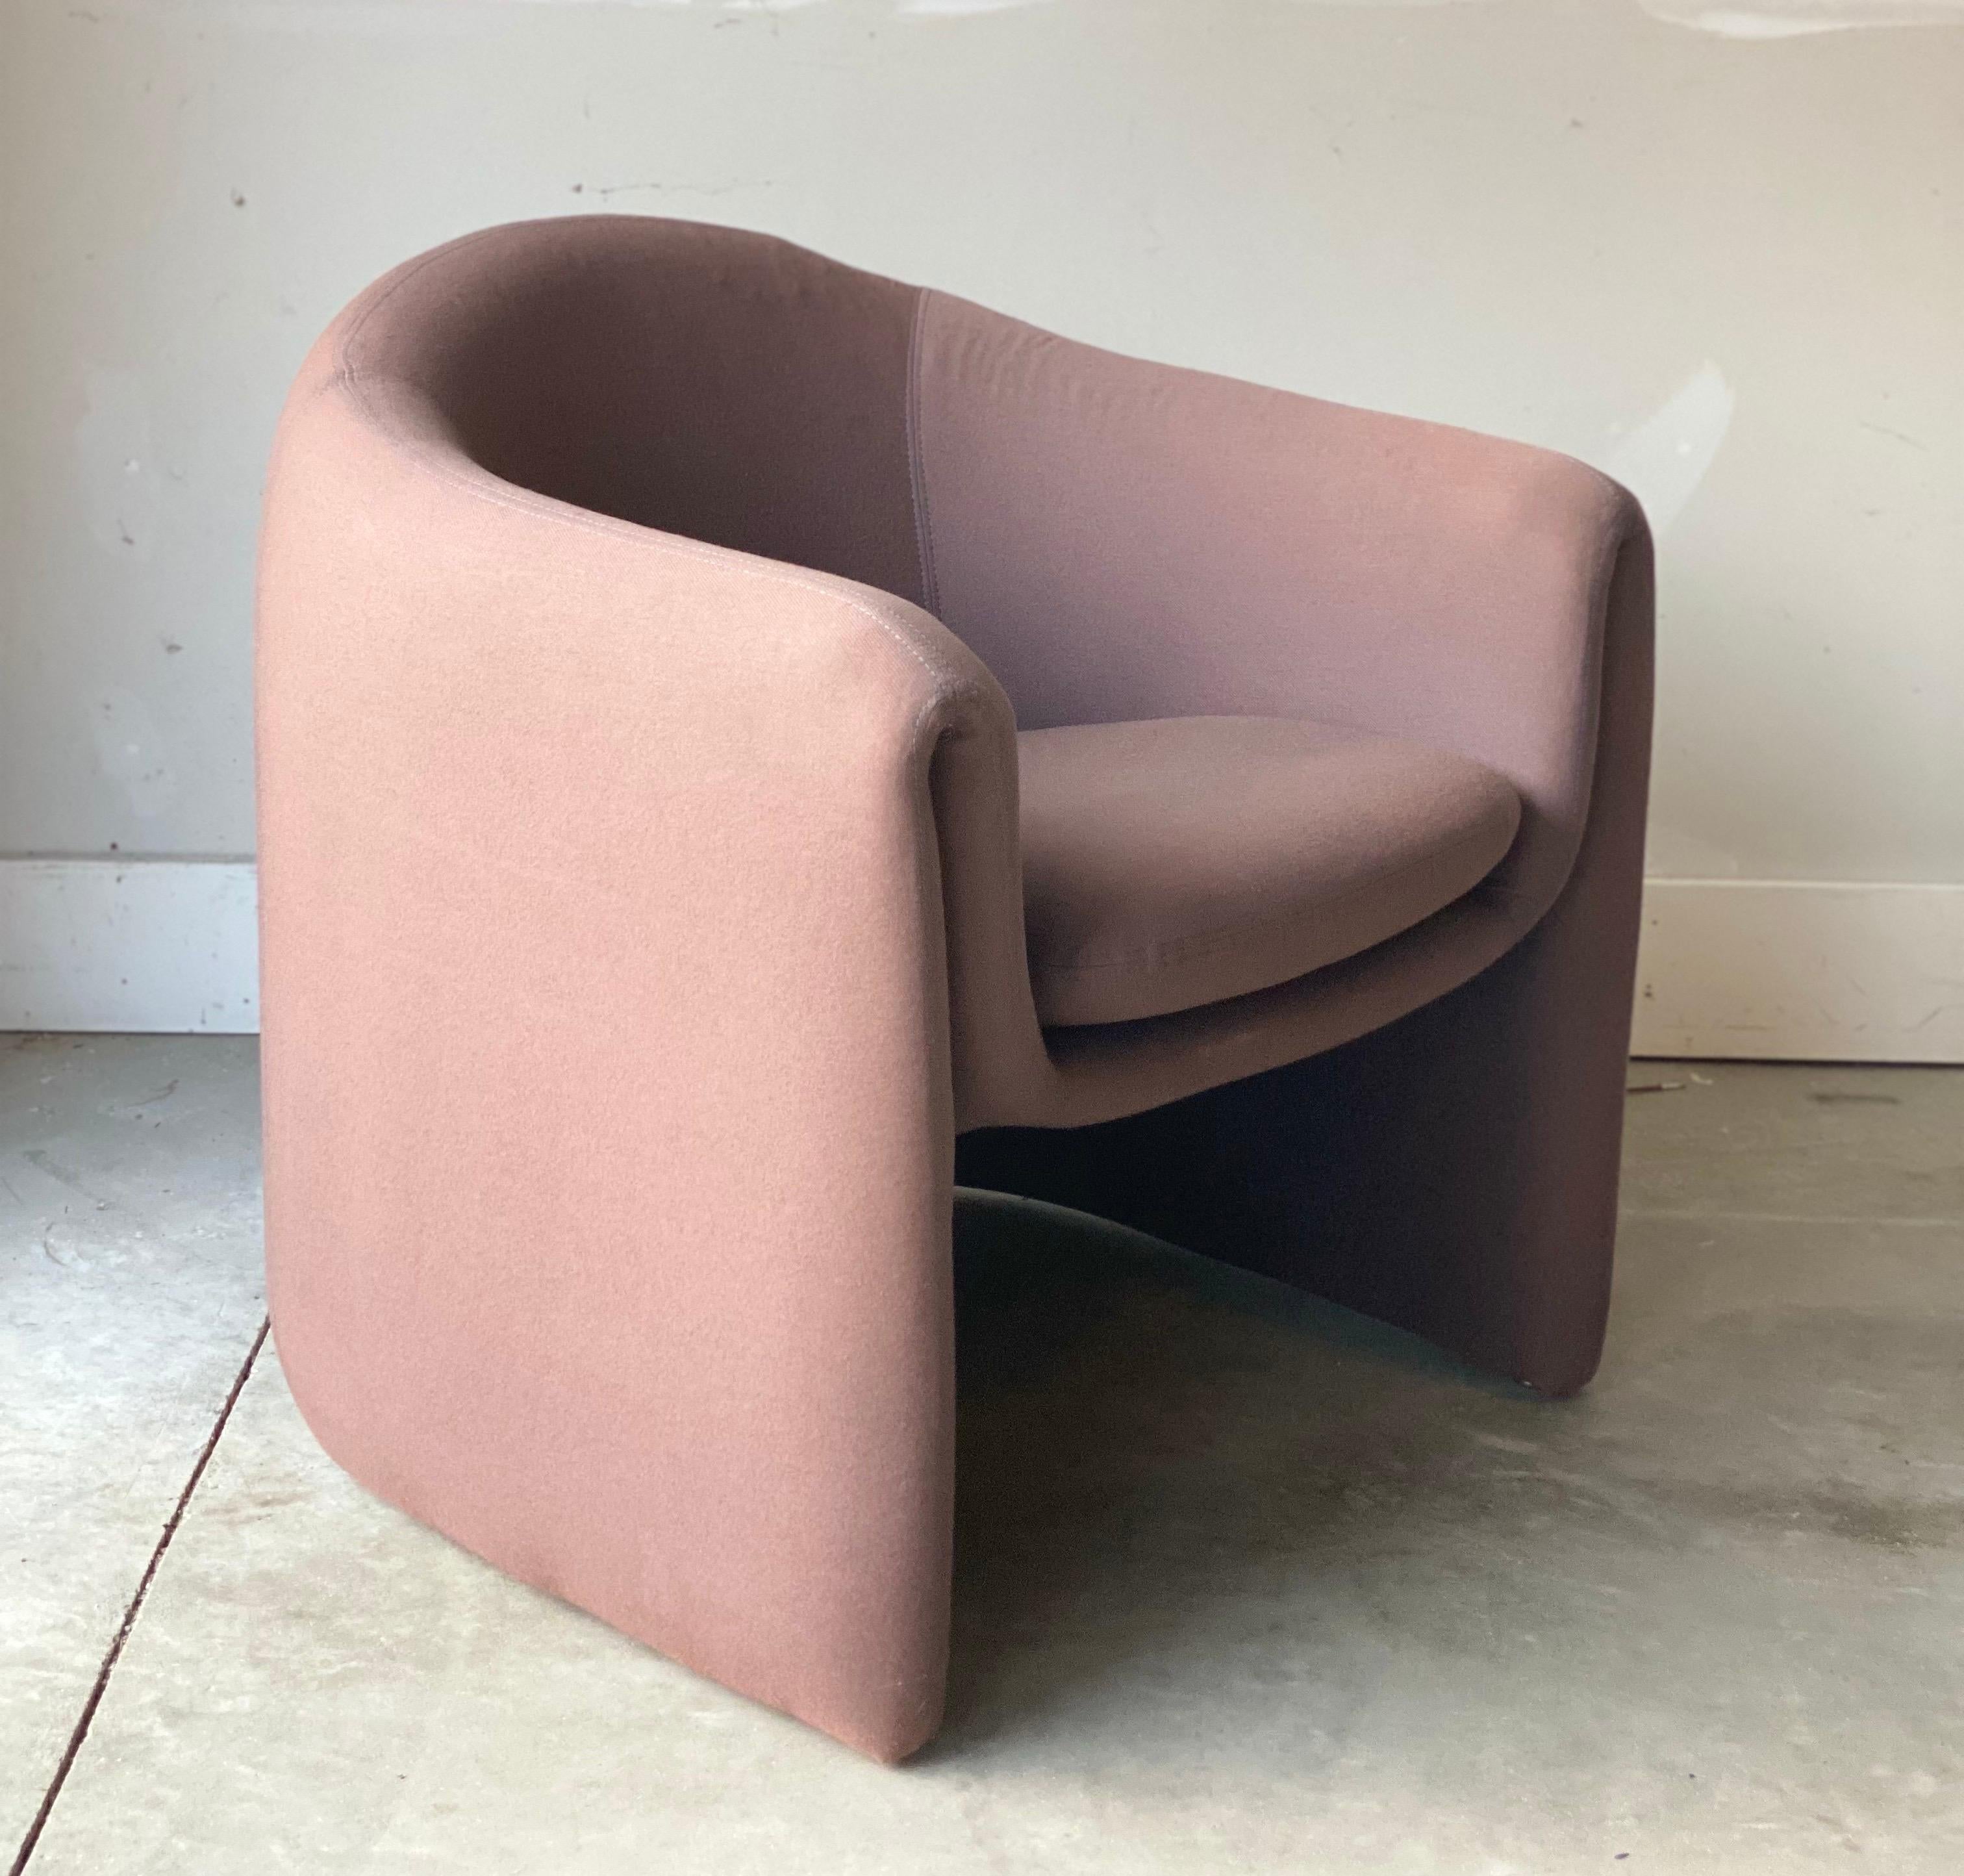 We are very pleased to offer a stylish, iconic, avant-garde chair by Vladimir Kagan for Preview, circa the 1990s. This piece is structurally sound, but fabric shows some wear and tear; thus, reupholstery is recommended. Marked on the bottom. Please